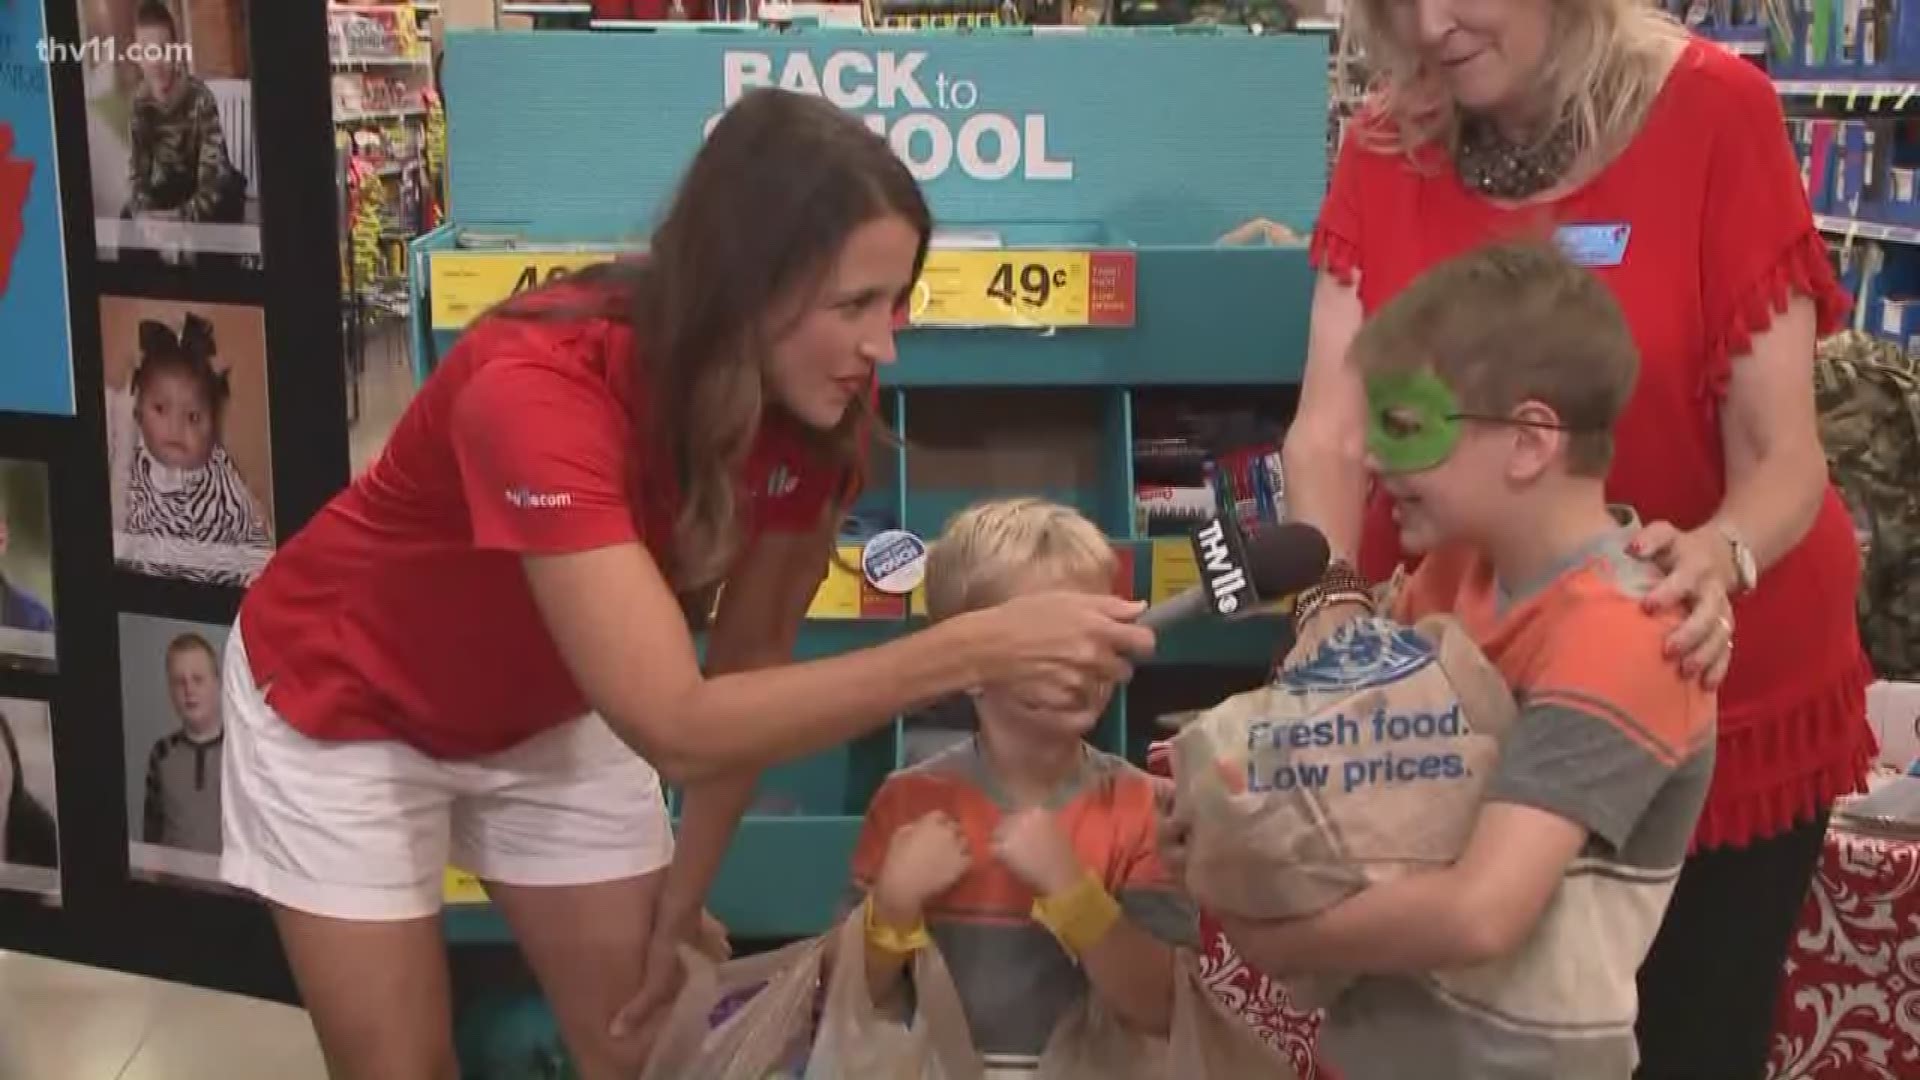 Kroger is hosting Christmas in July, an event aiming to raise proceeds for Project Zero.